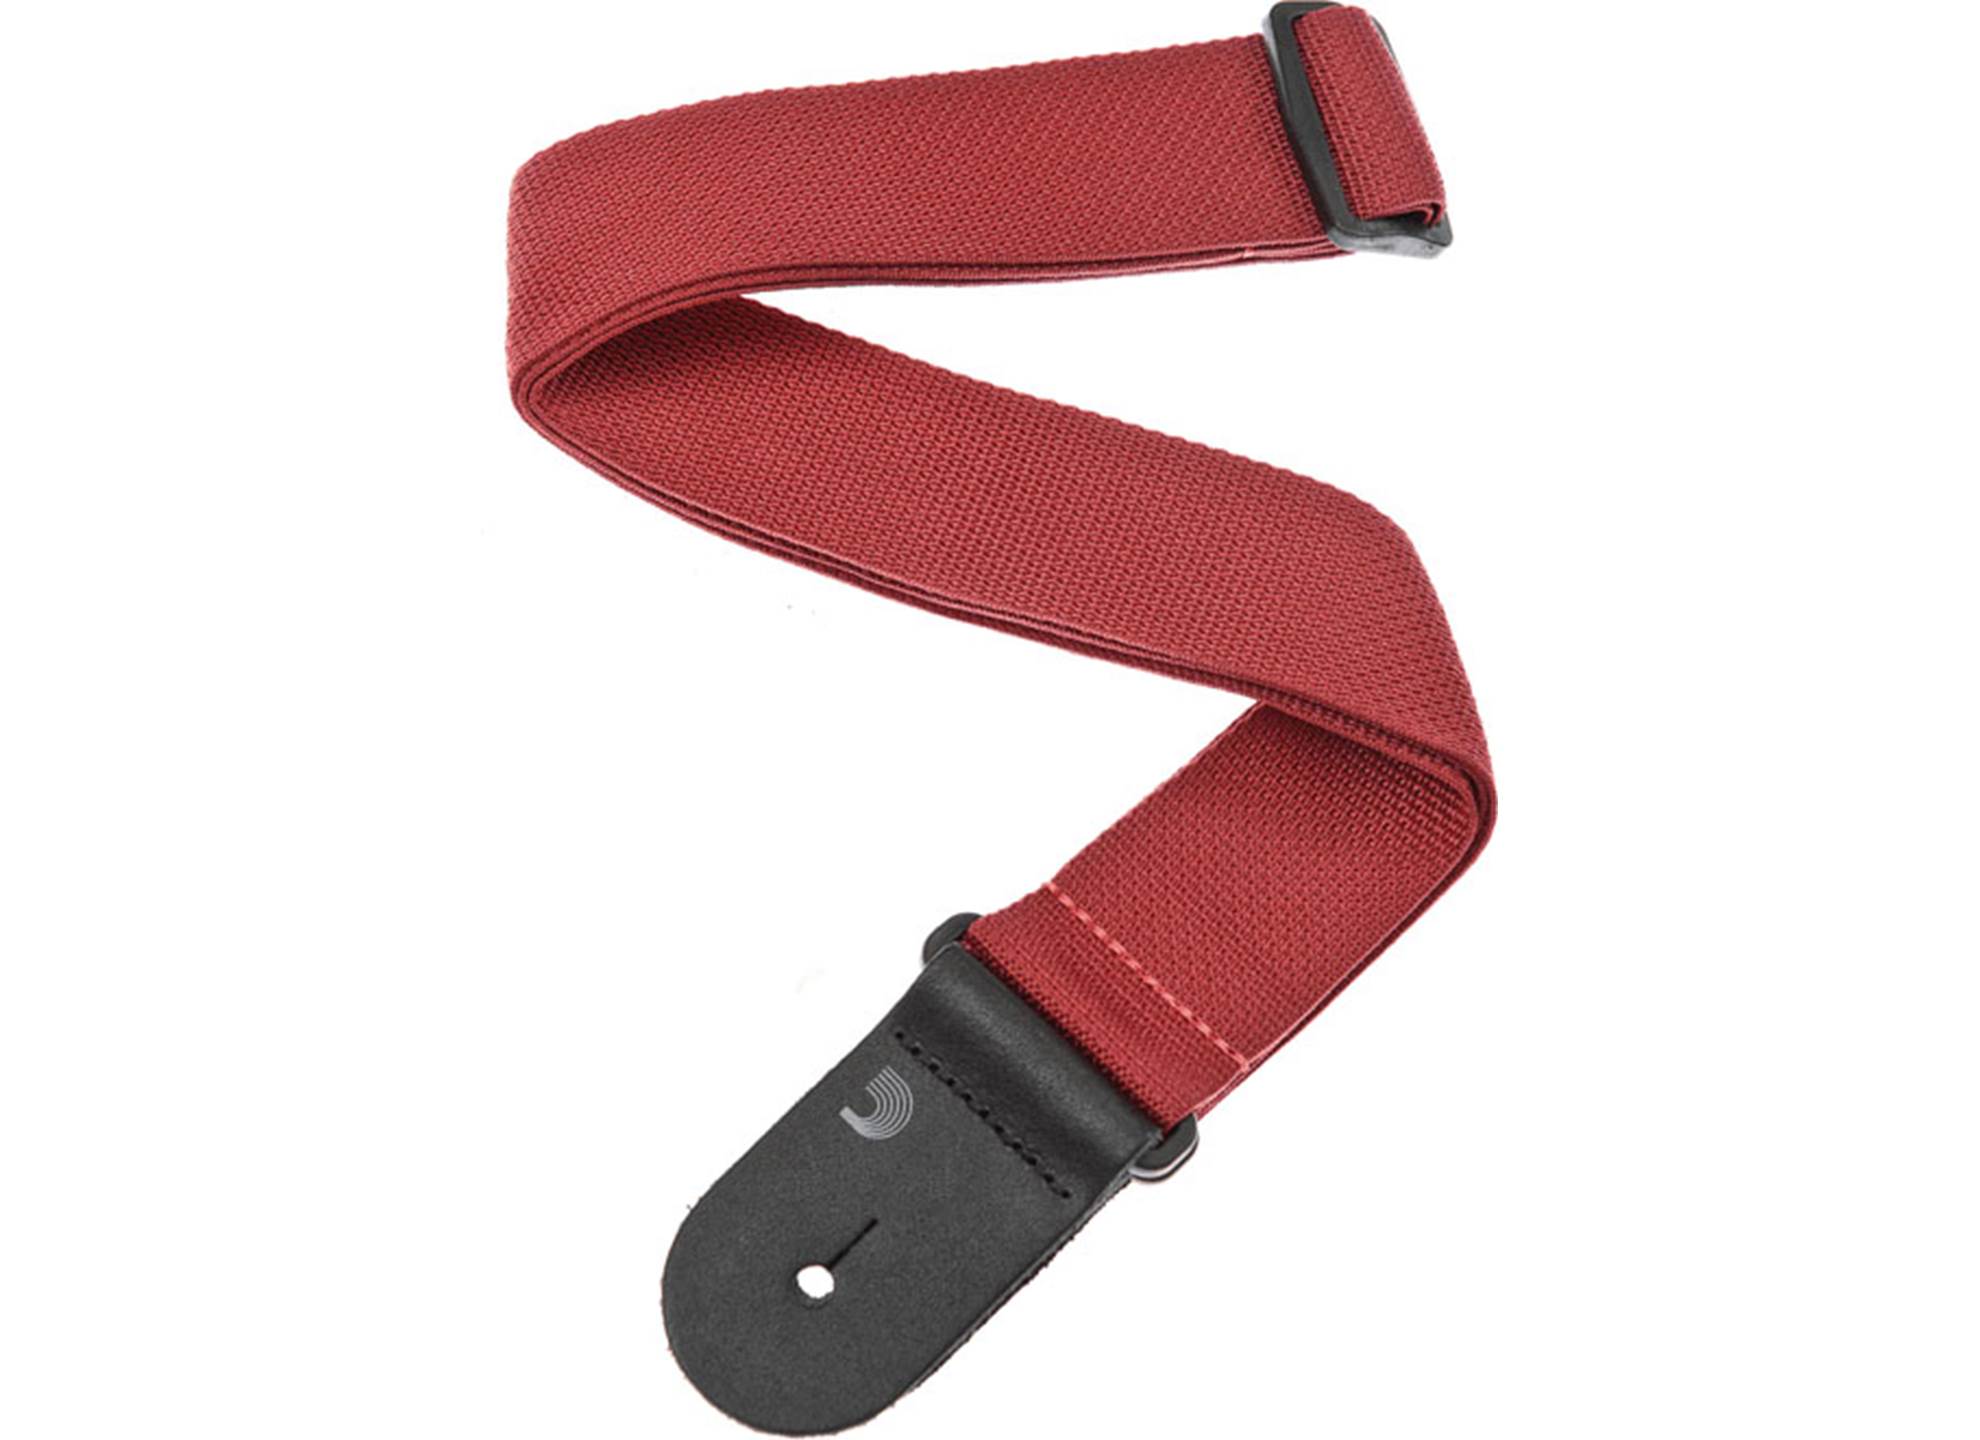 PWS101 Polypro Strap Red